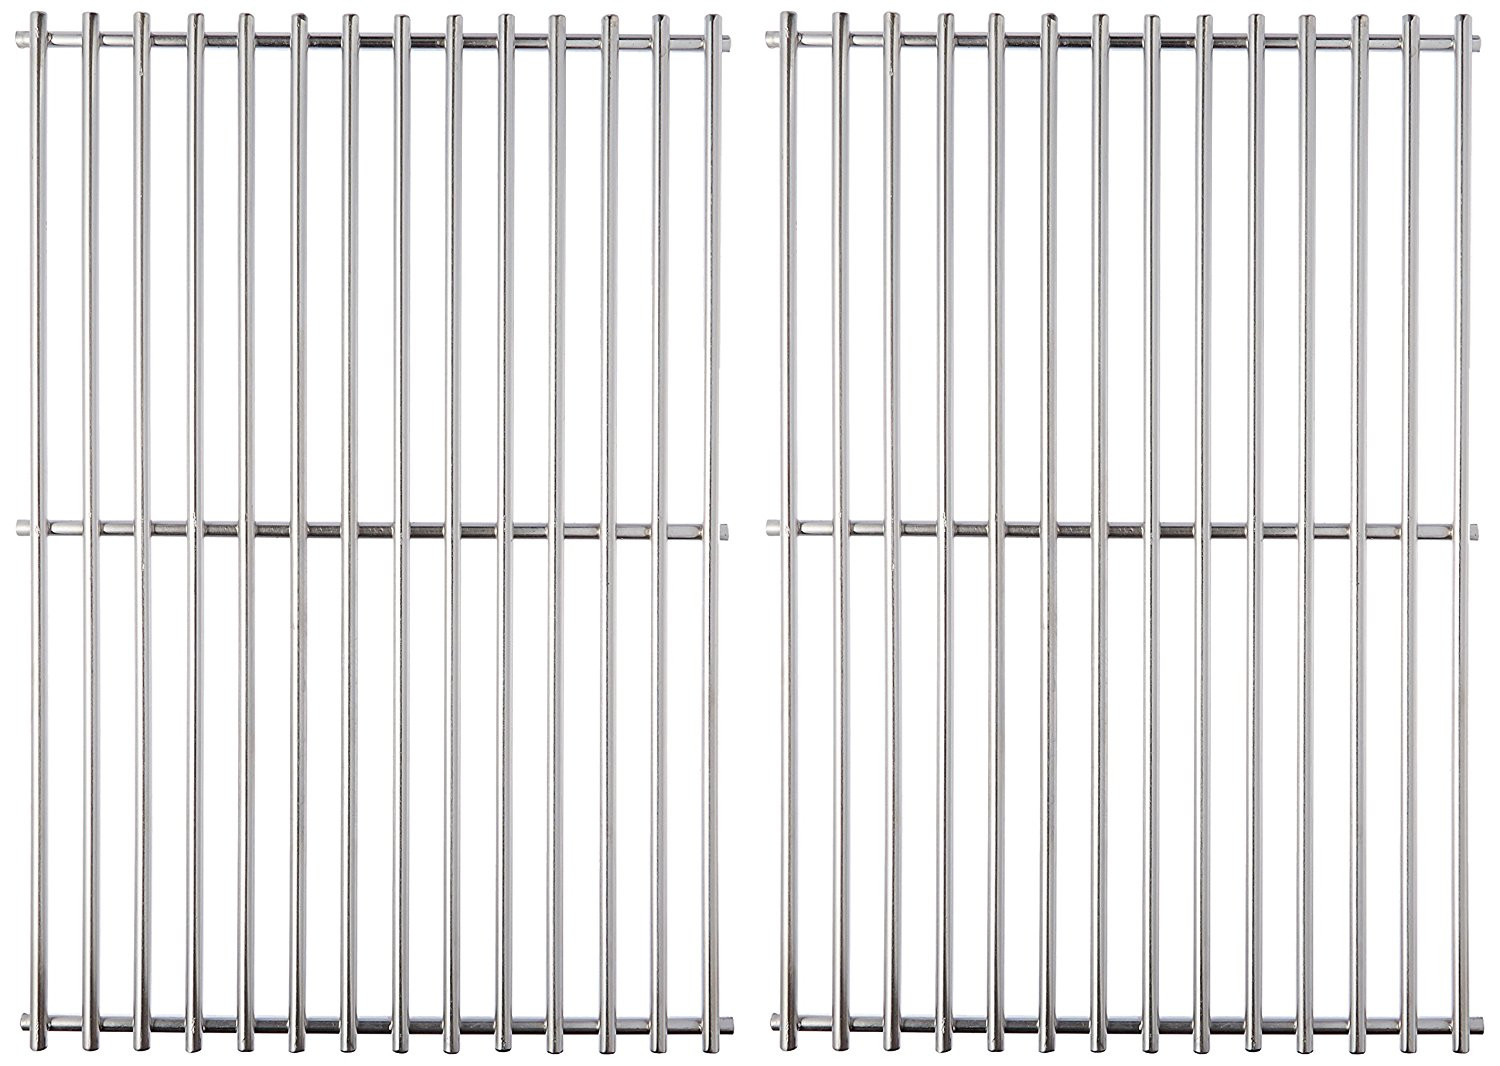 Stainless steel wire cooking grid for Master Forge brand gas grills